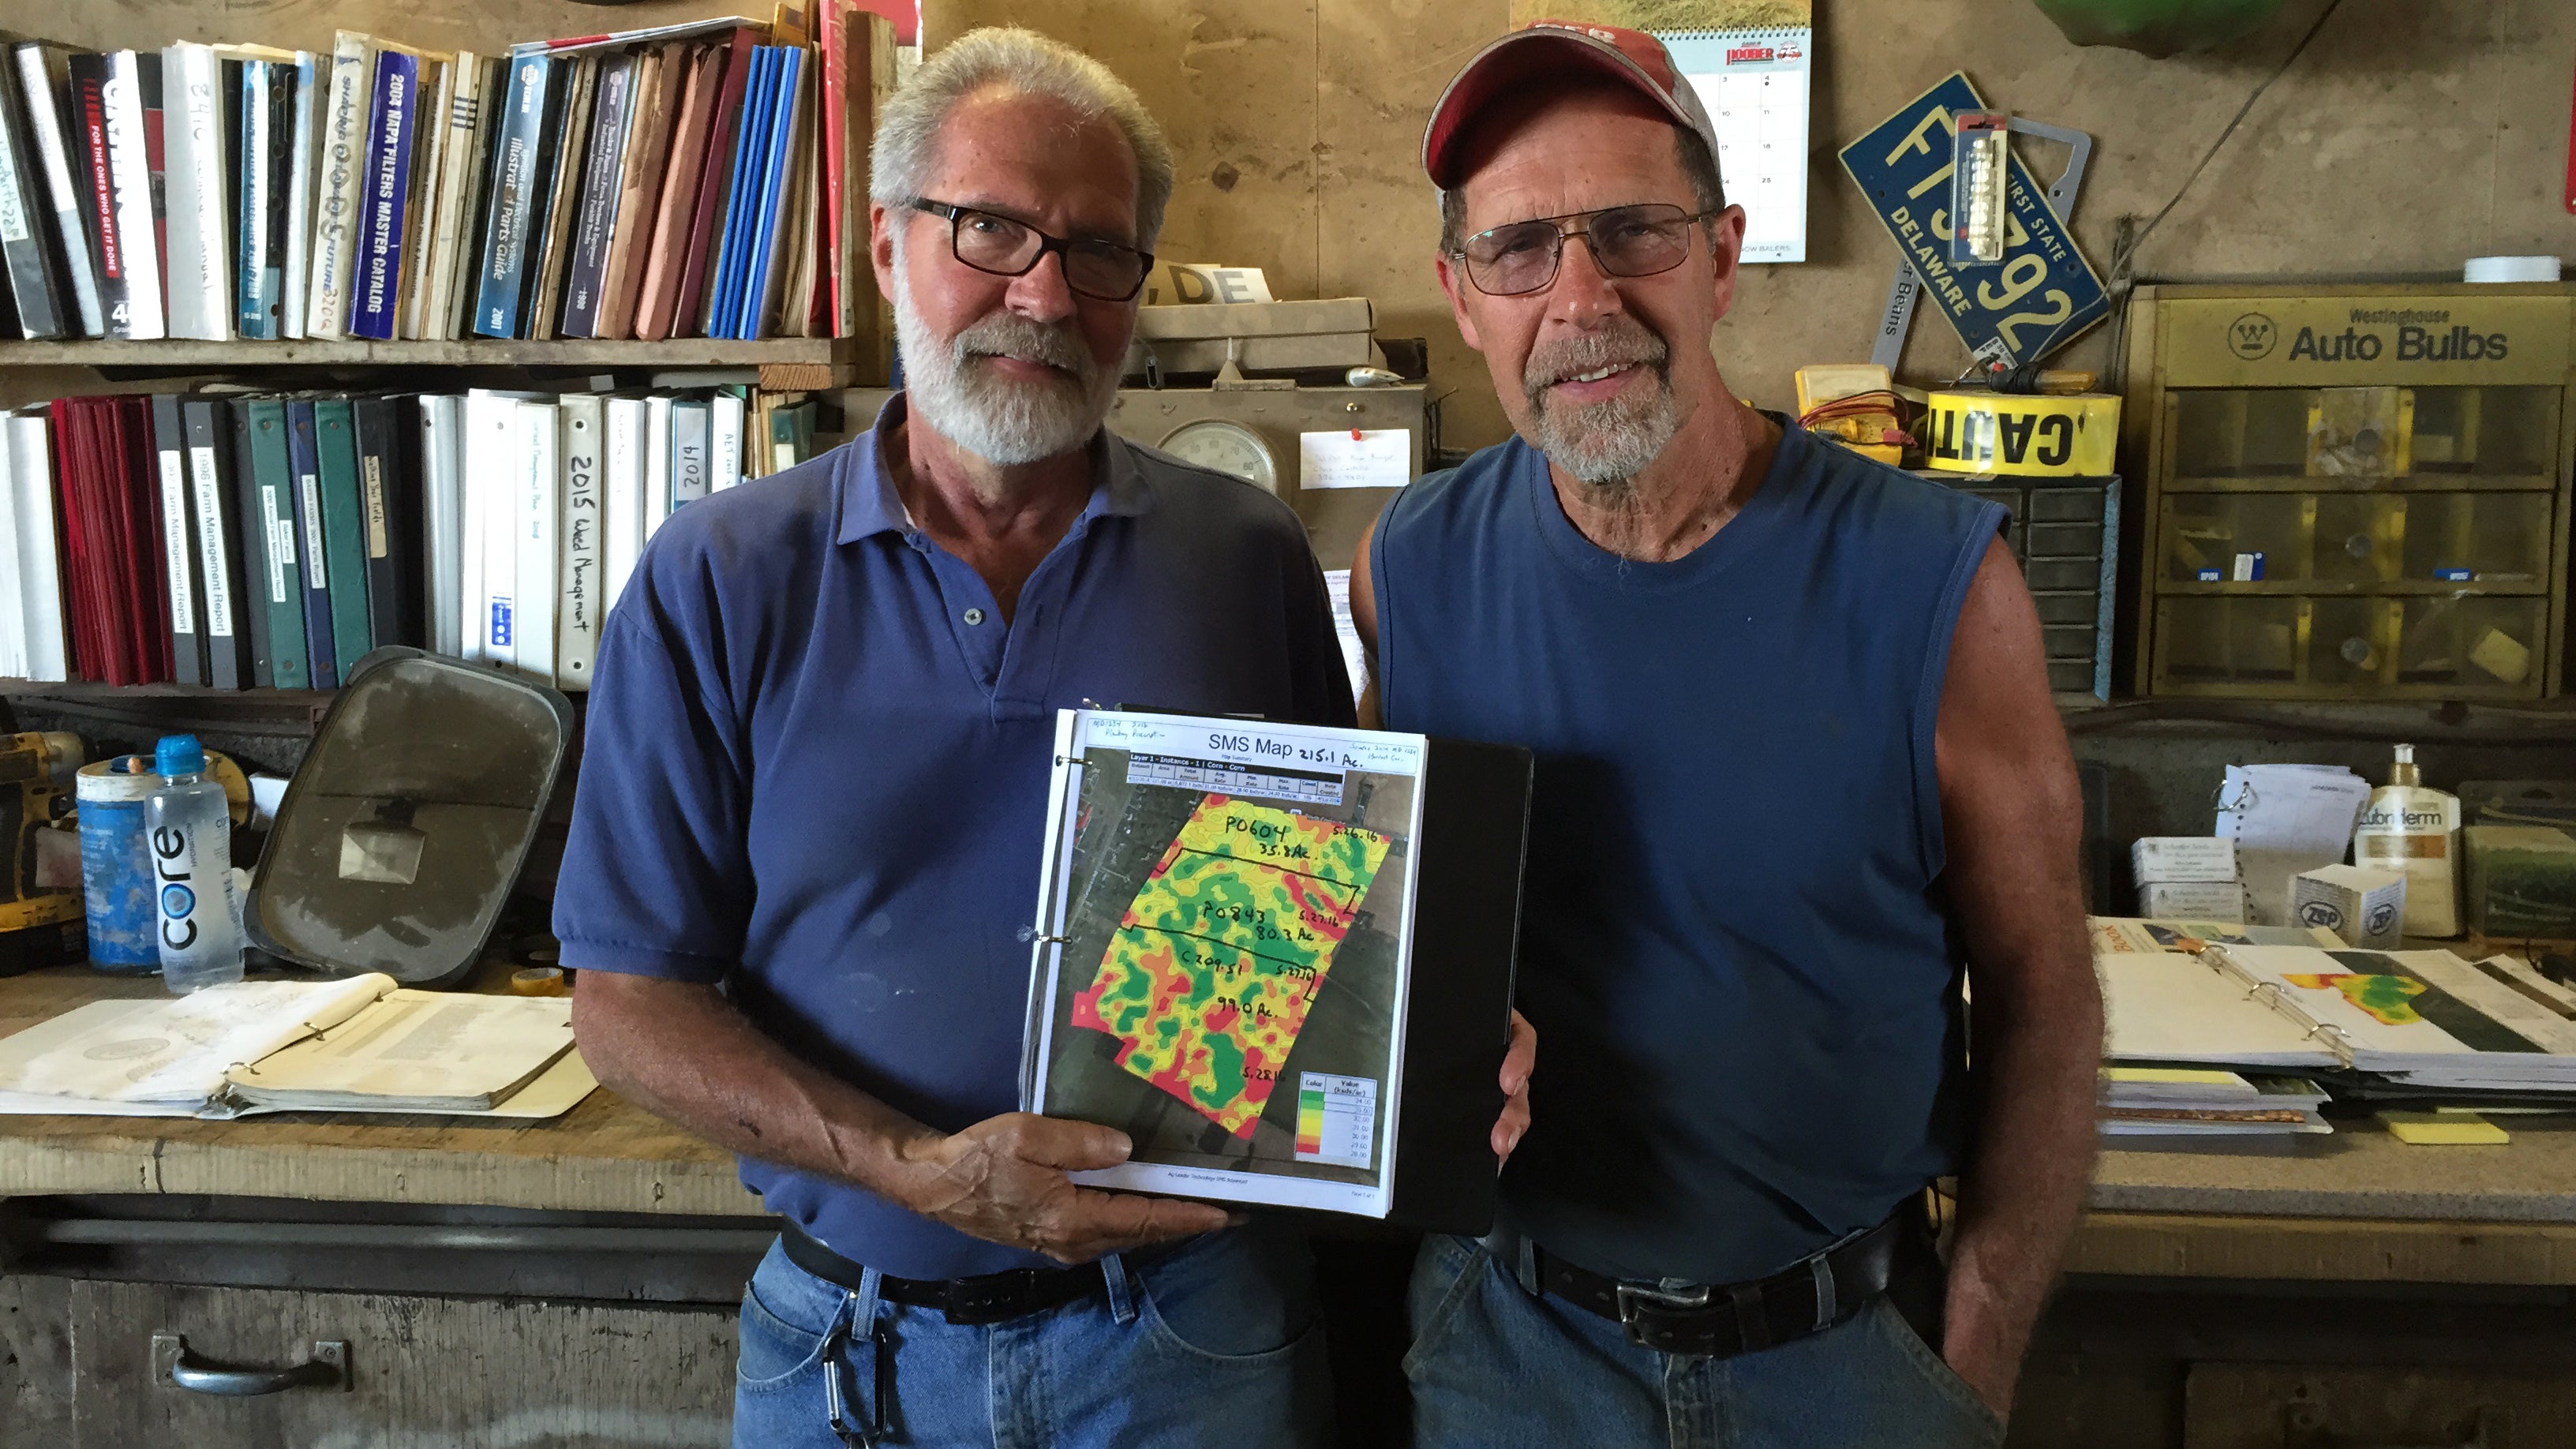 Dave and Ed Baker have been farming their land in Delaware since the 1960s. They started adopting precision ag technology in 2002. (Irina Zhorov/The Pulse)